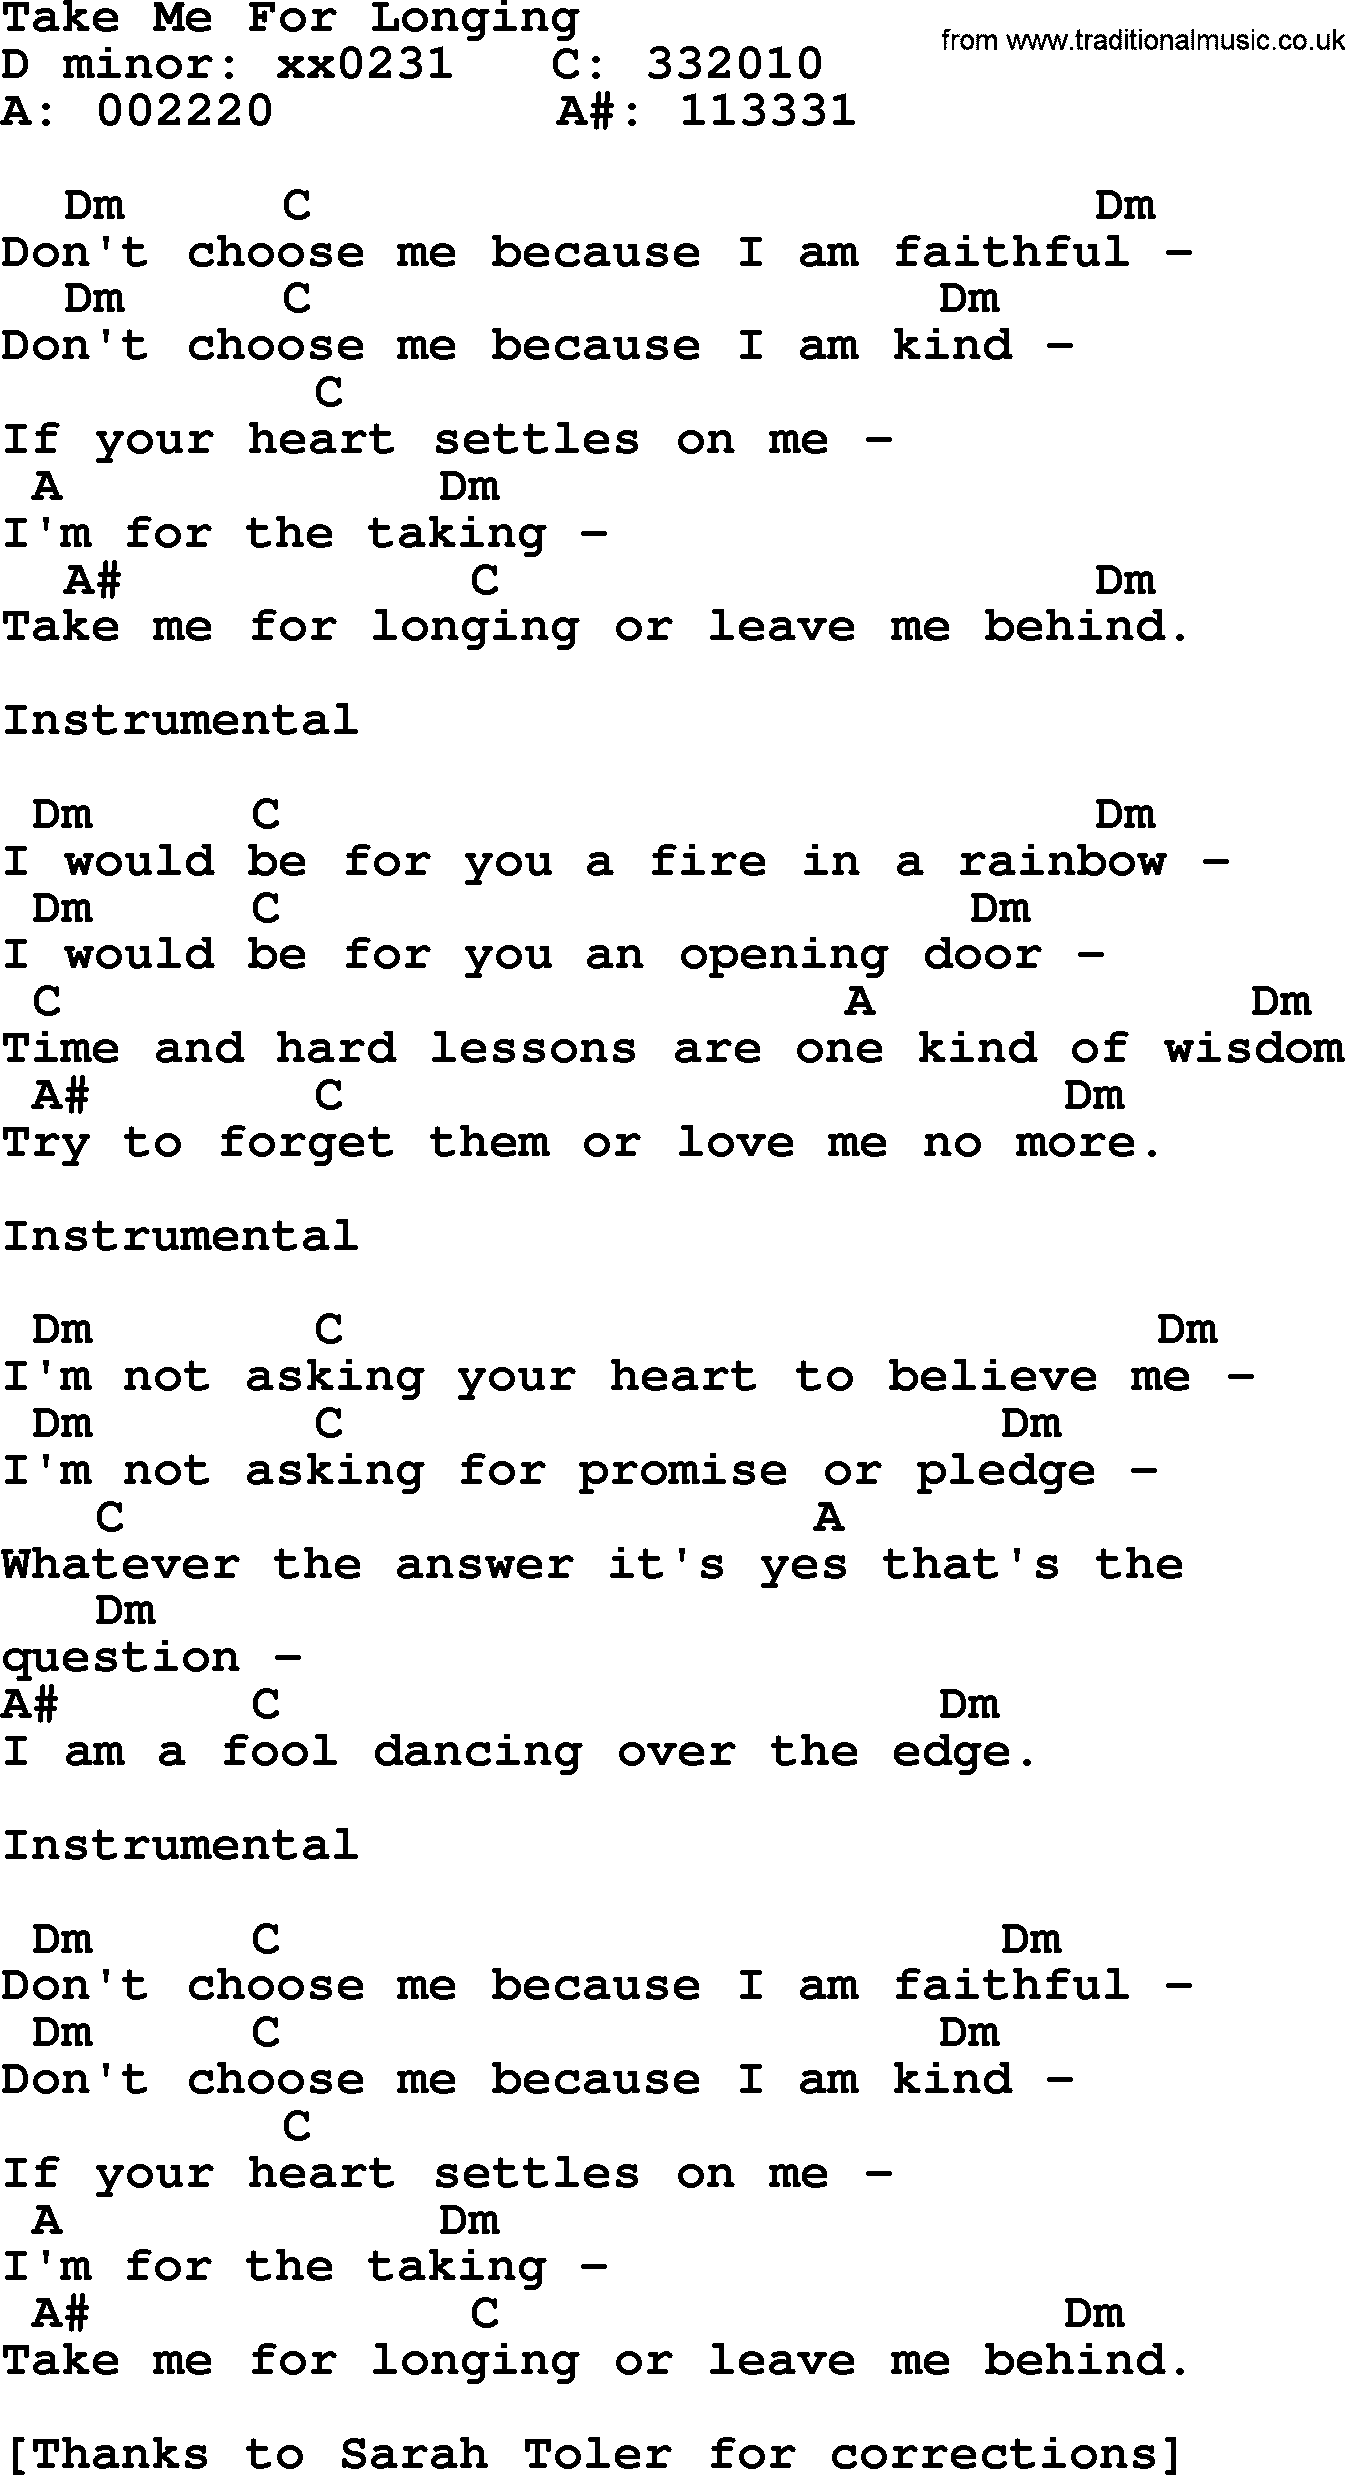 Bluegrass song: Take Me For Longing, lyrics and chords